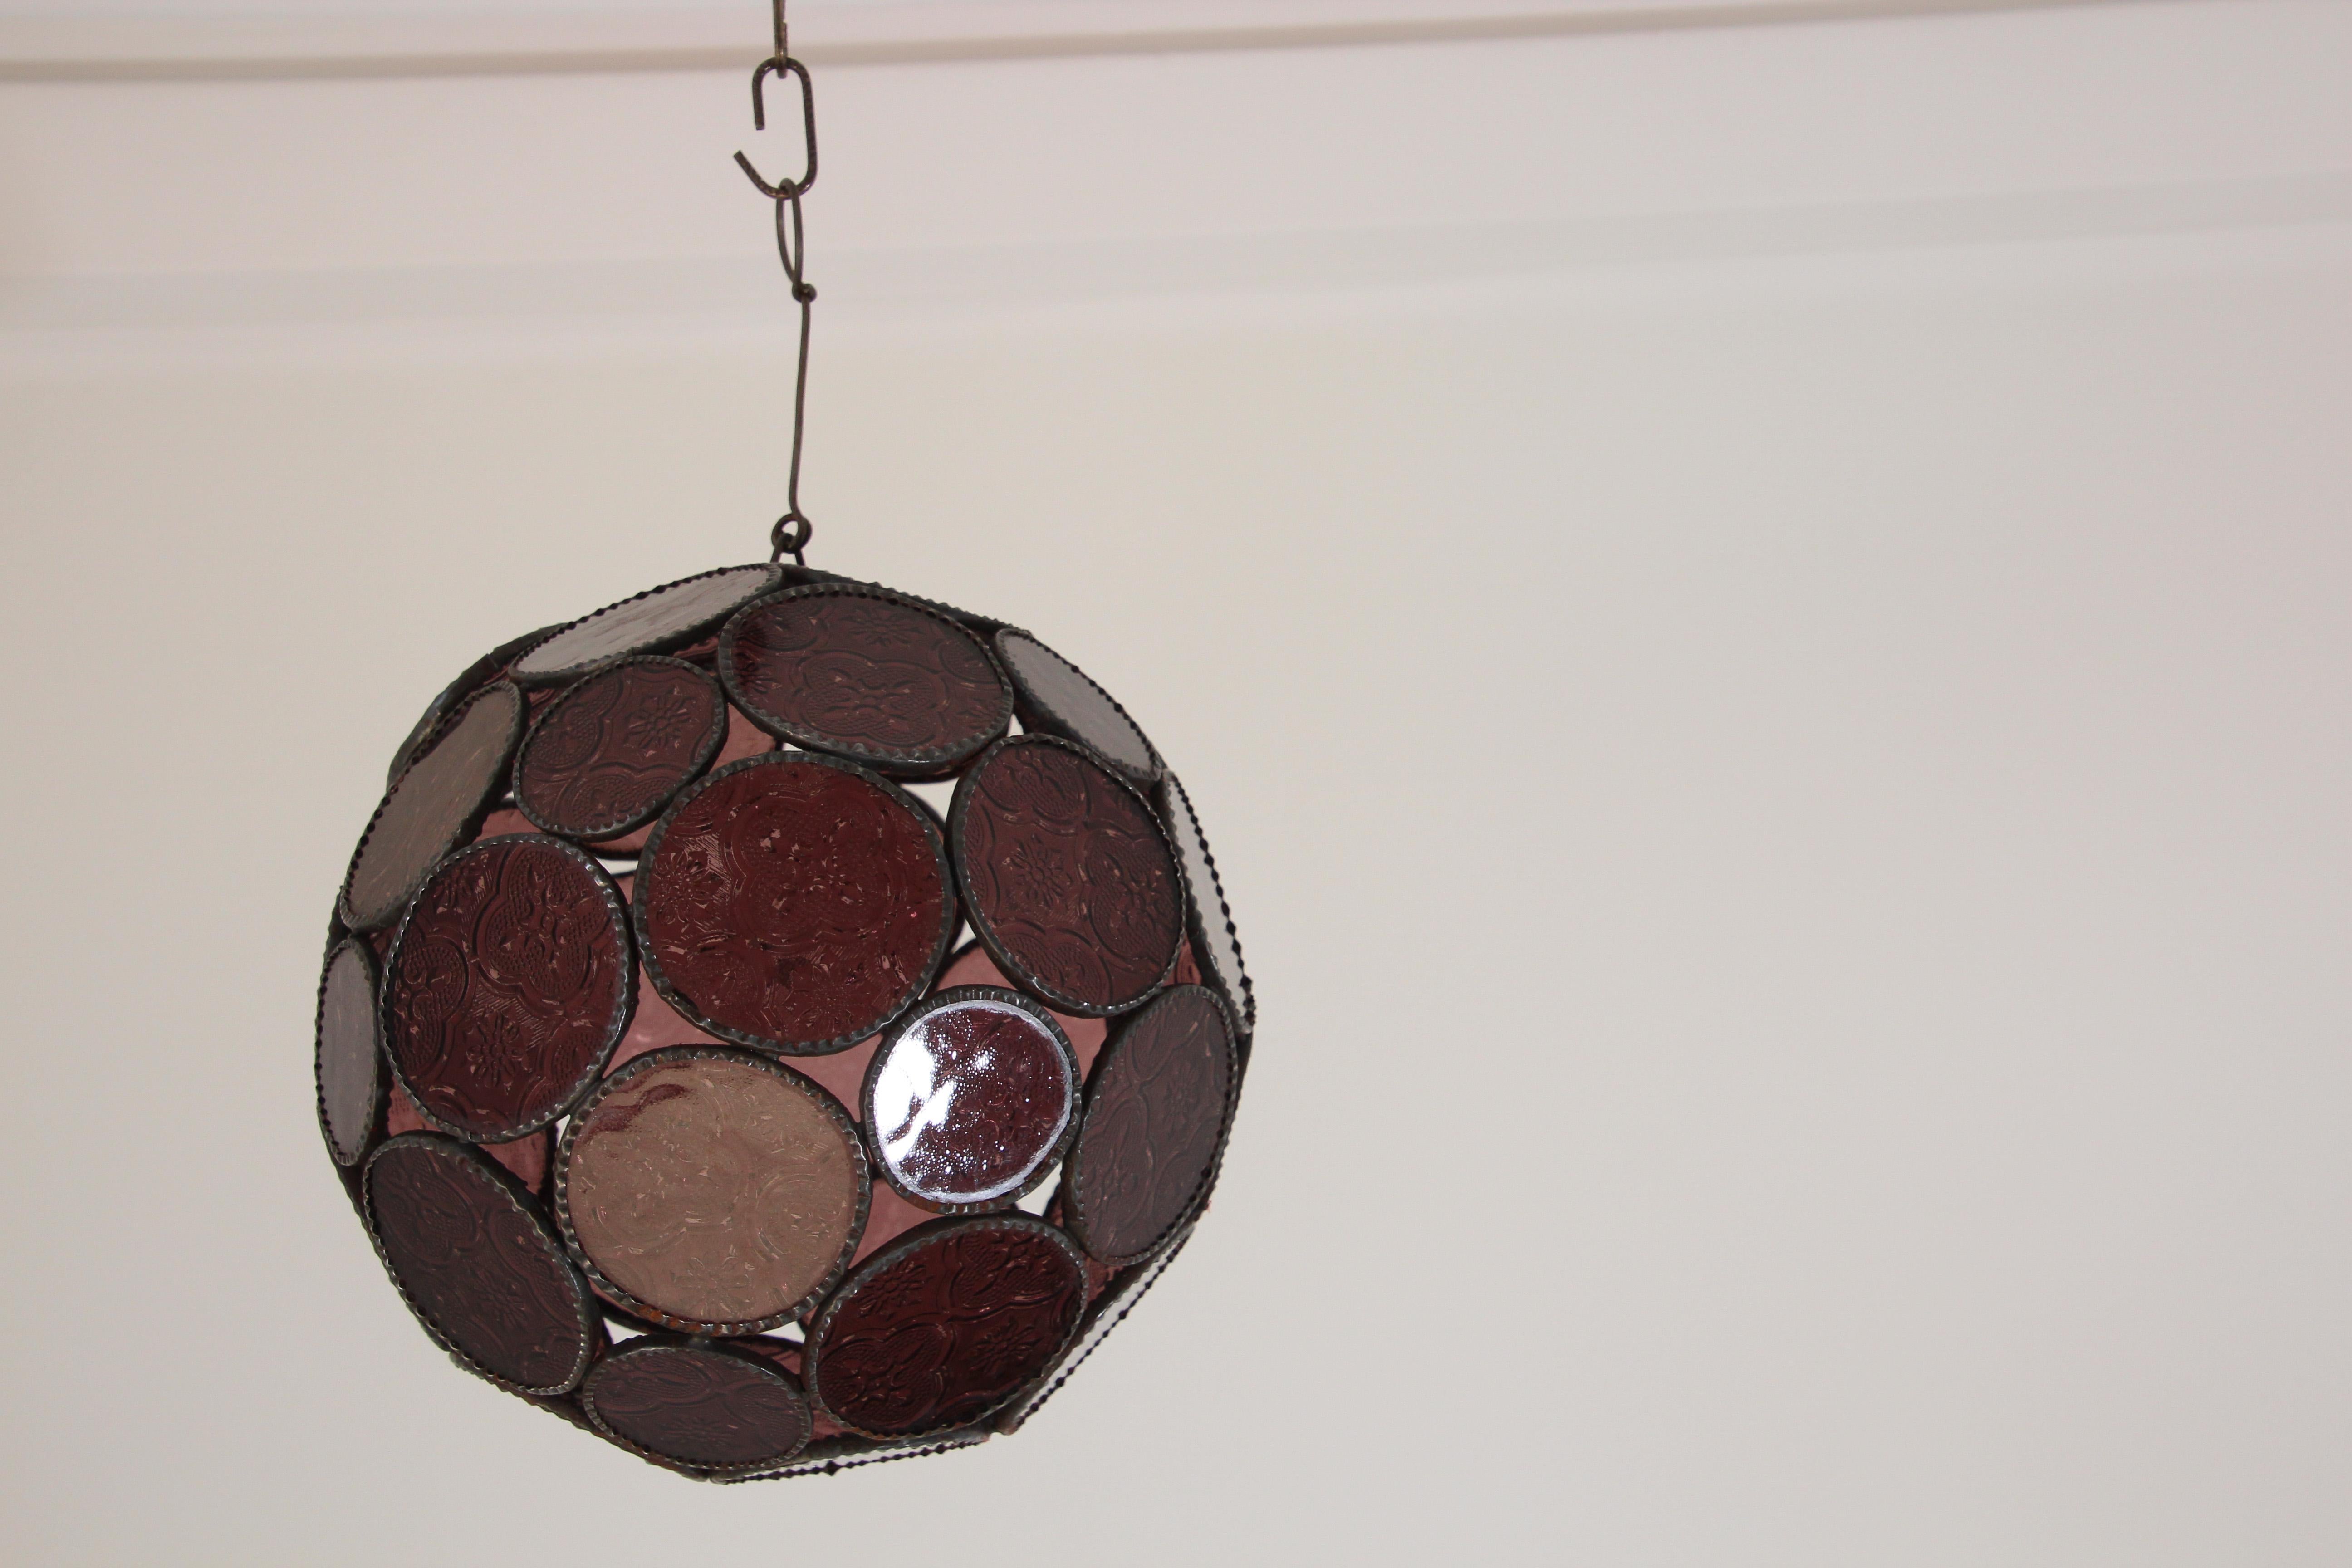 Handcrafted Moroccan lavender glass lantern or Moorish pendant.
Amber molded glass with Moorish design circles put together in an orb style lamp.
Handmade in Marrakech, metal rust color finish, colorful multifaceted orb glass pendant.
Could be